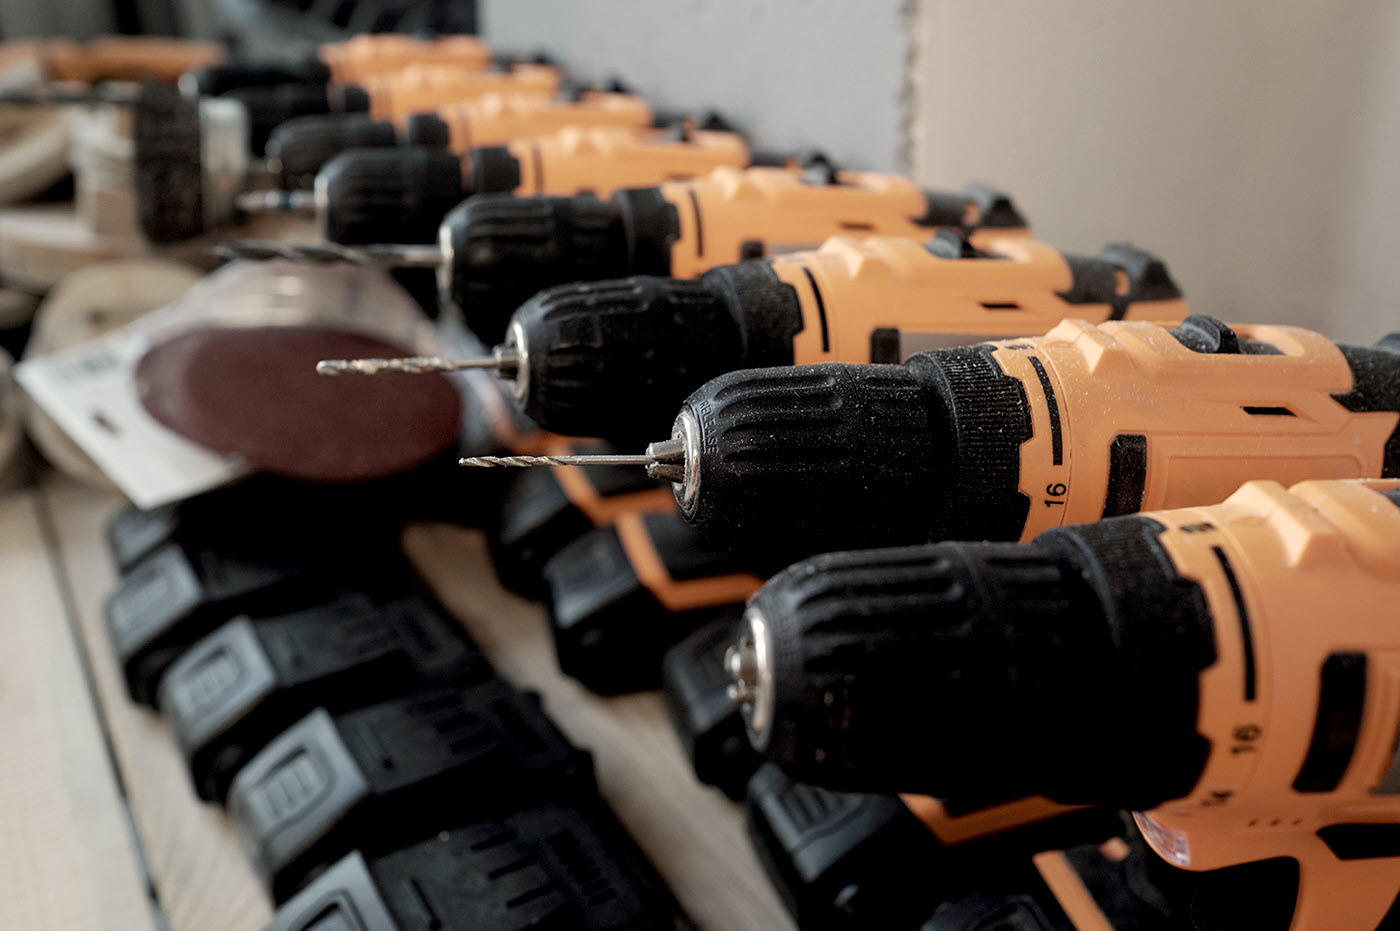 A row of electric drills.